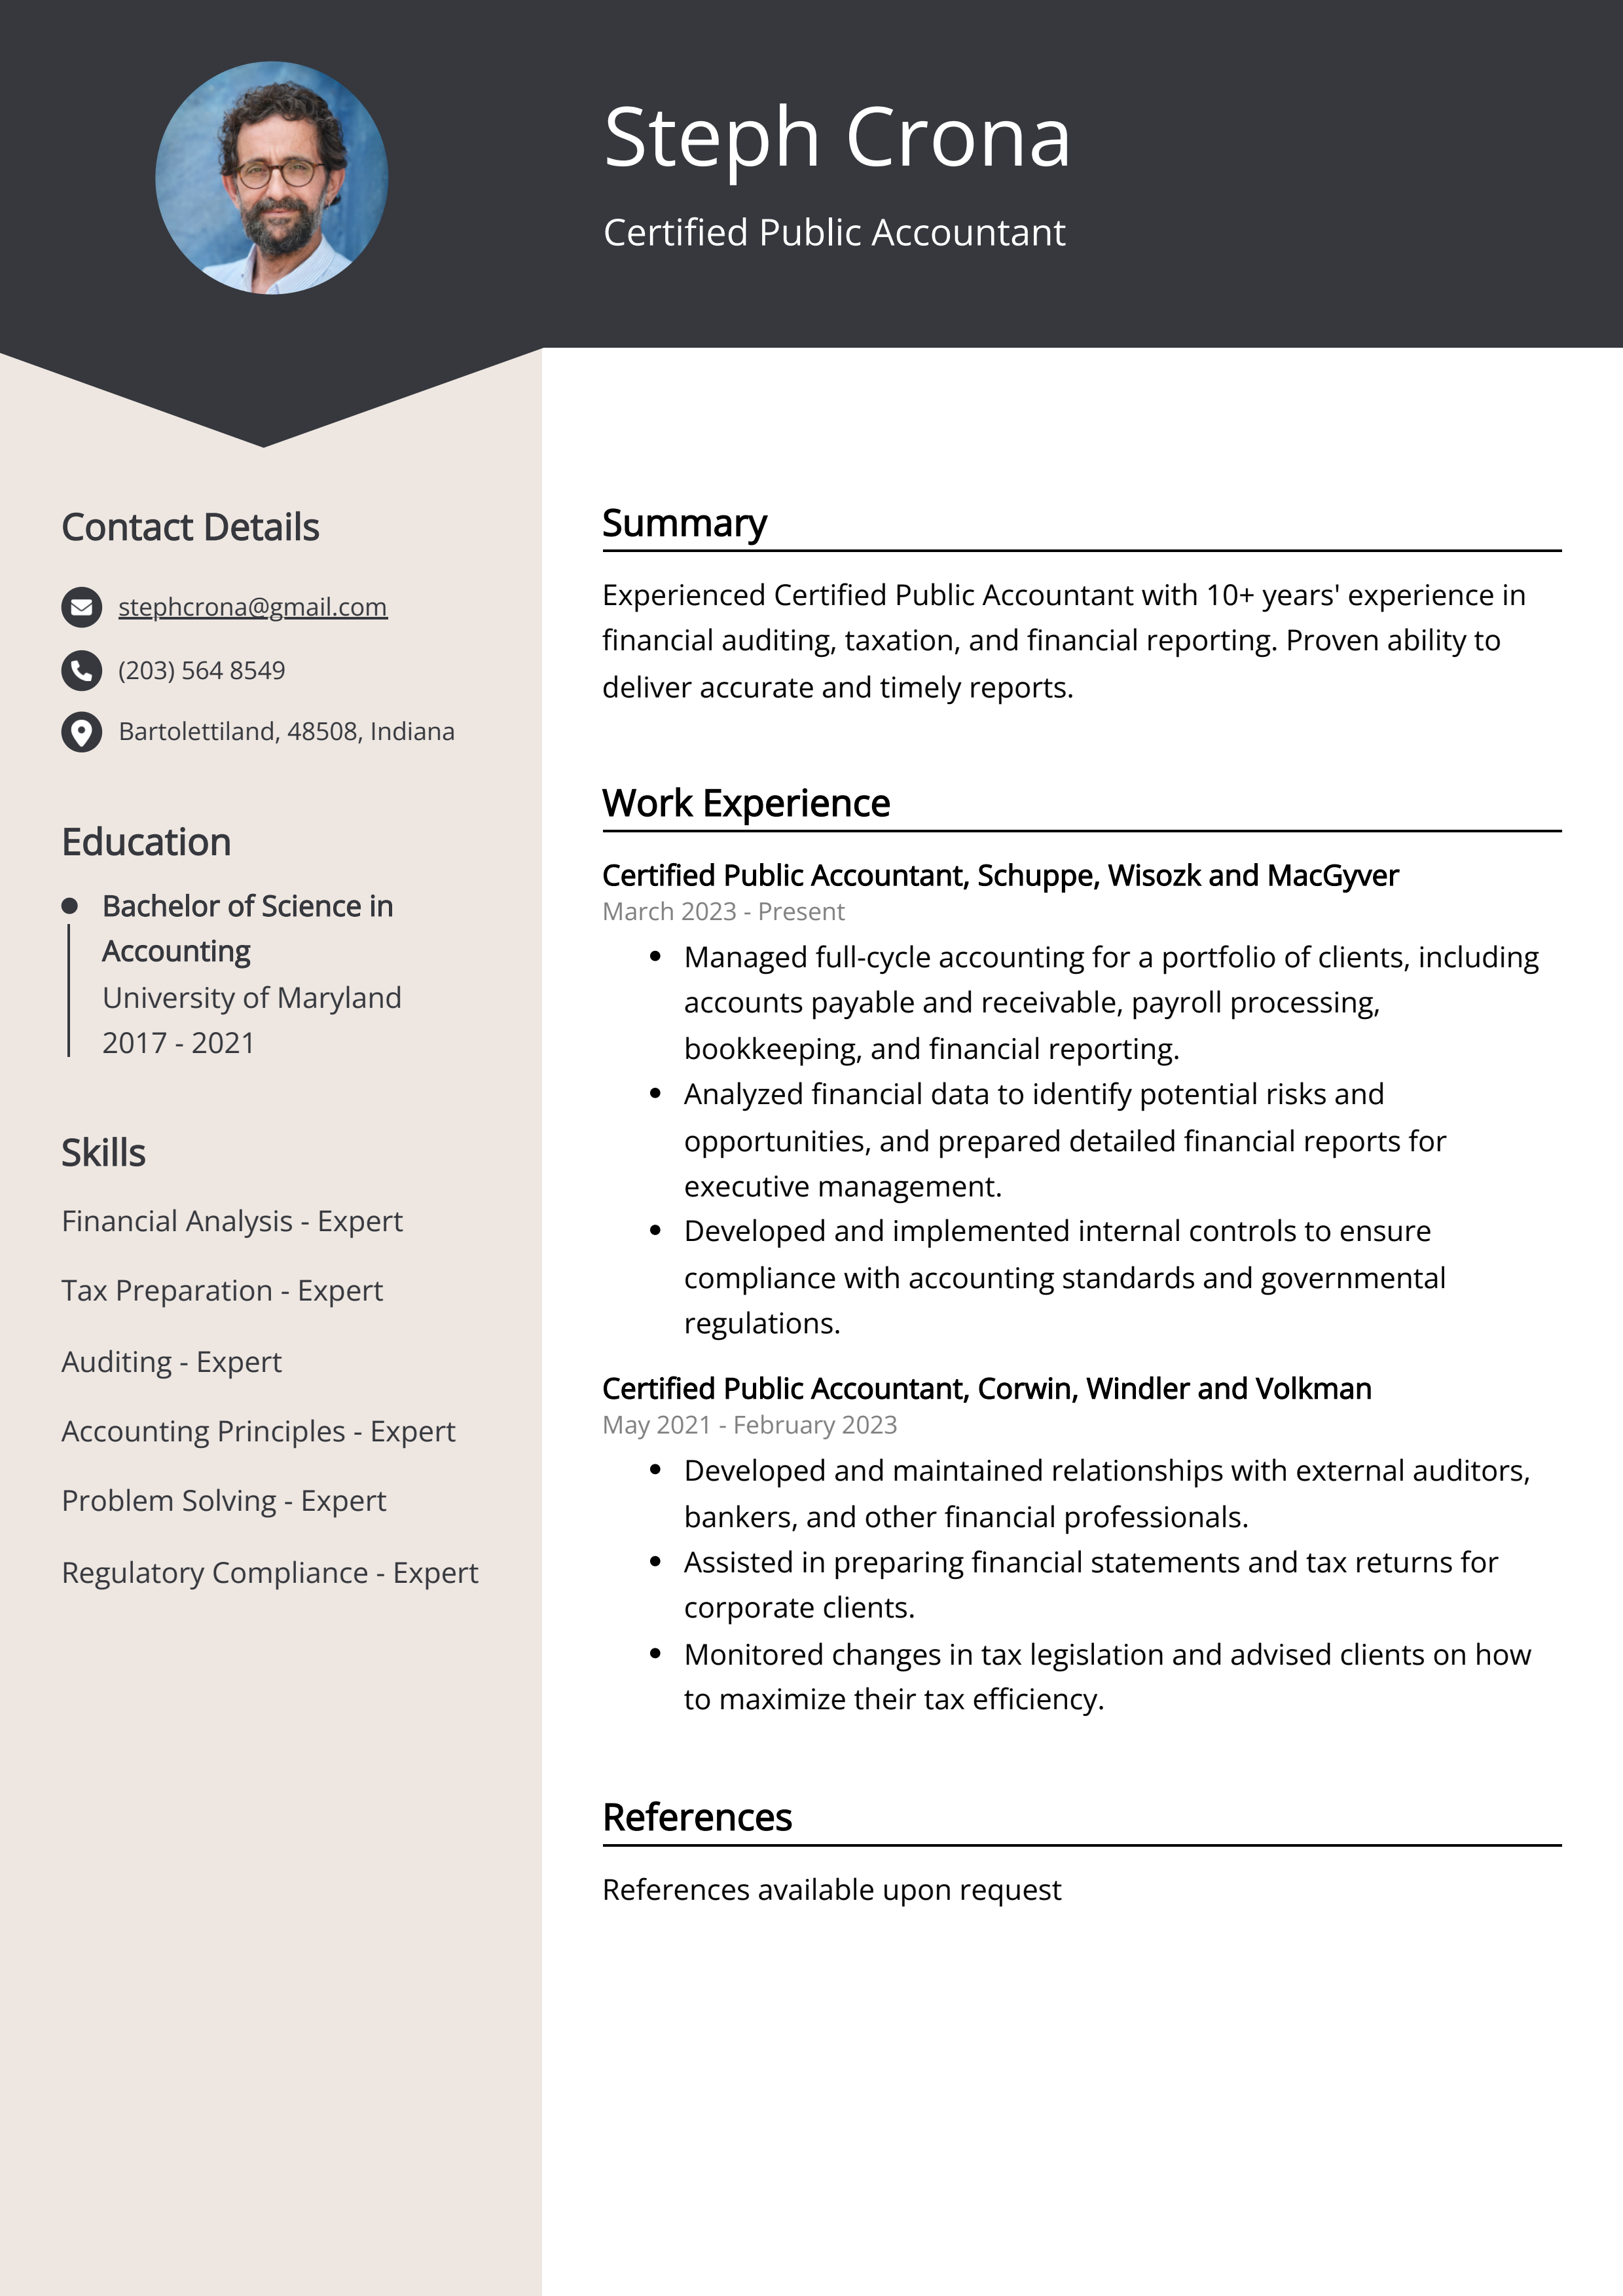 Certified Public Accountant CV Example